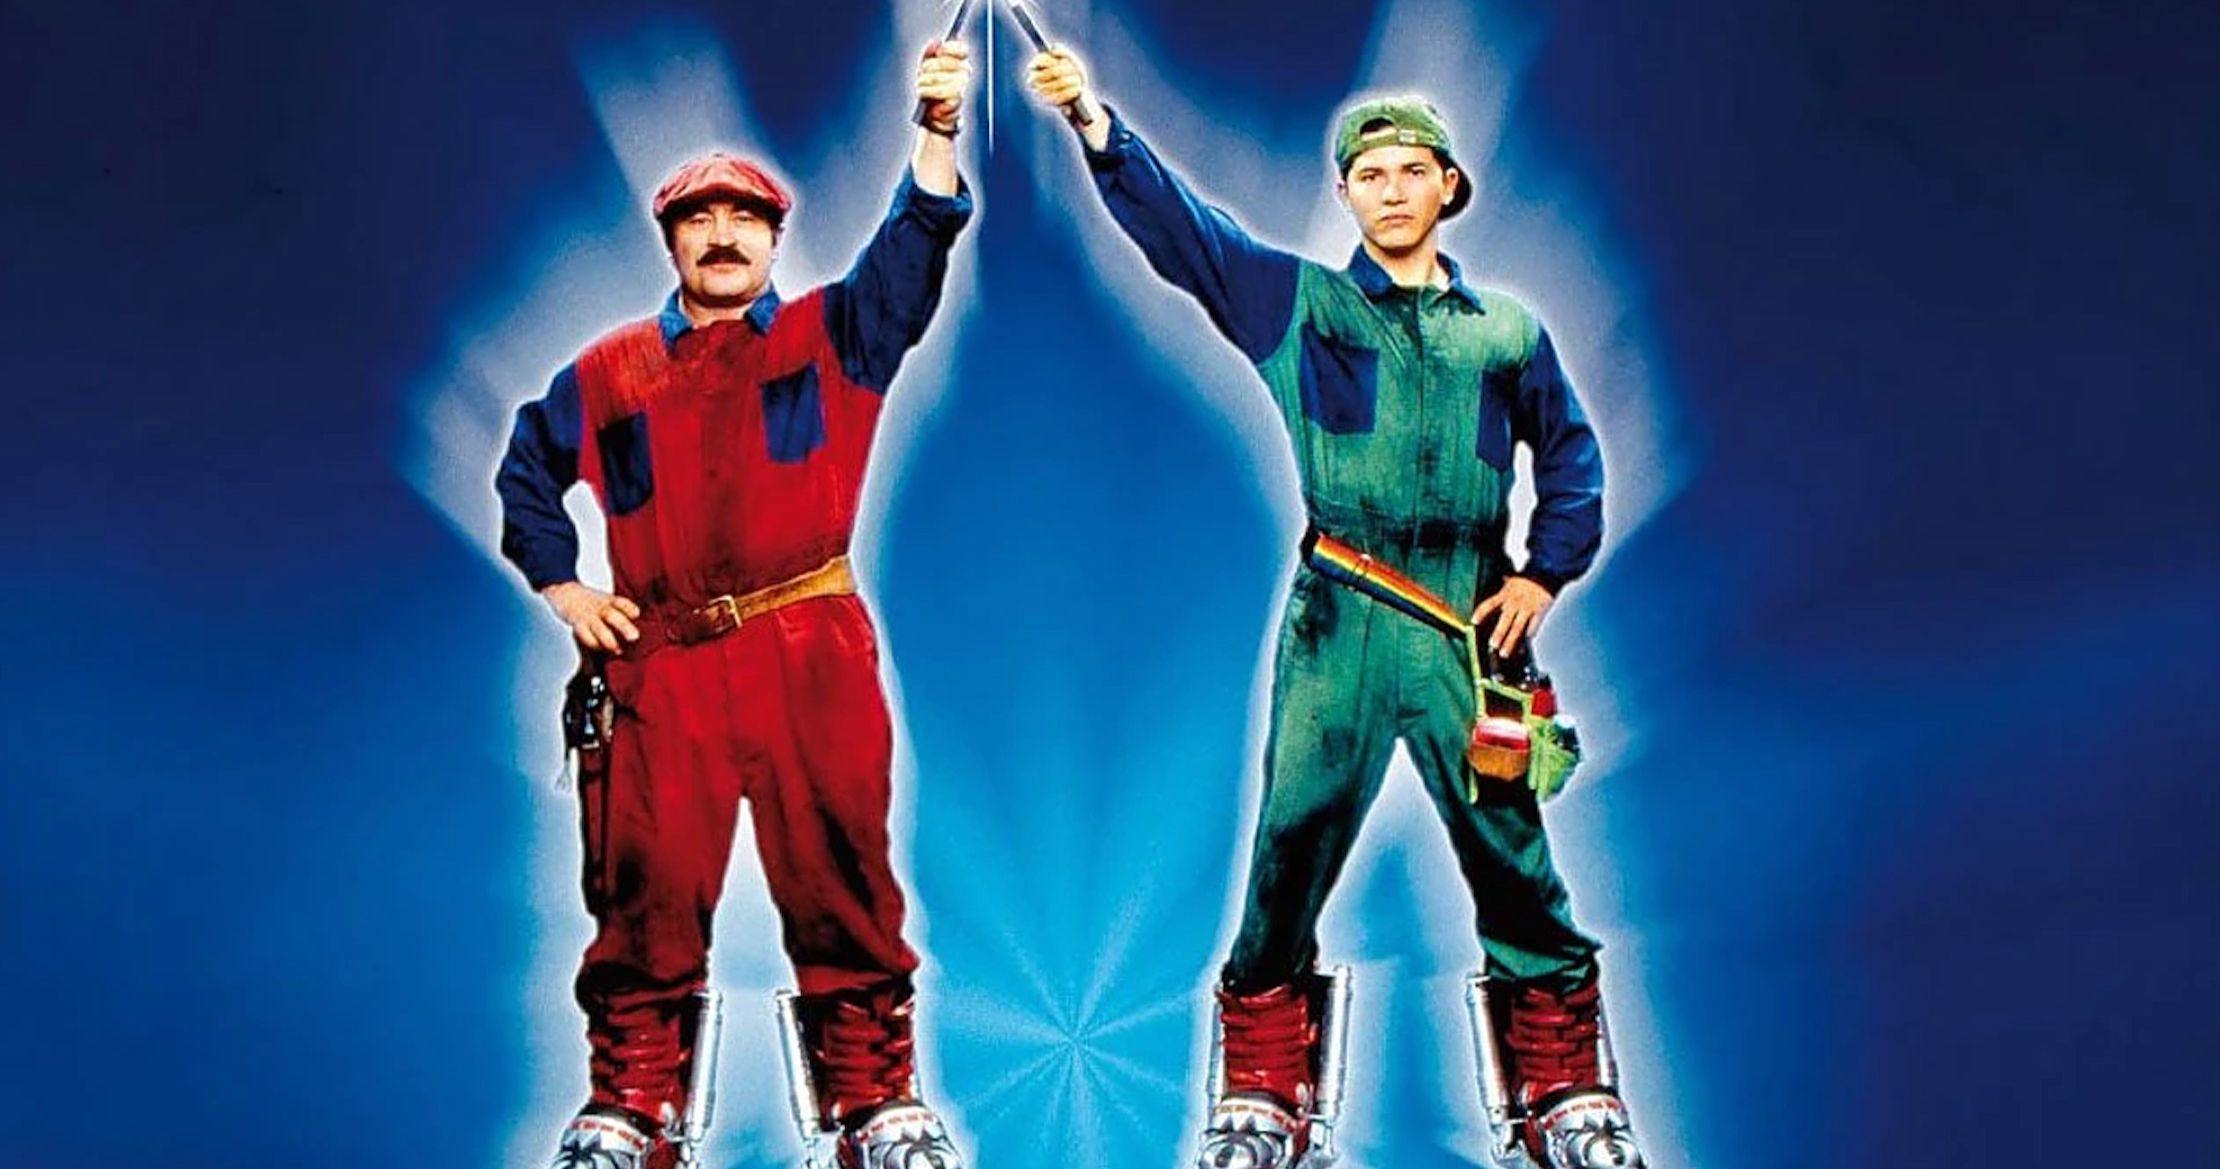 Super Mario Bros. Movie Extended Cut with 20 Minutes of New Footage